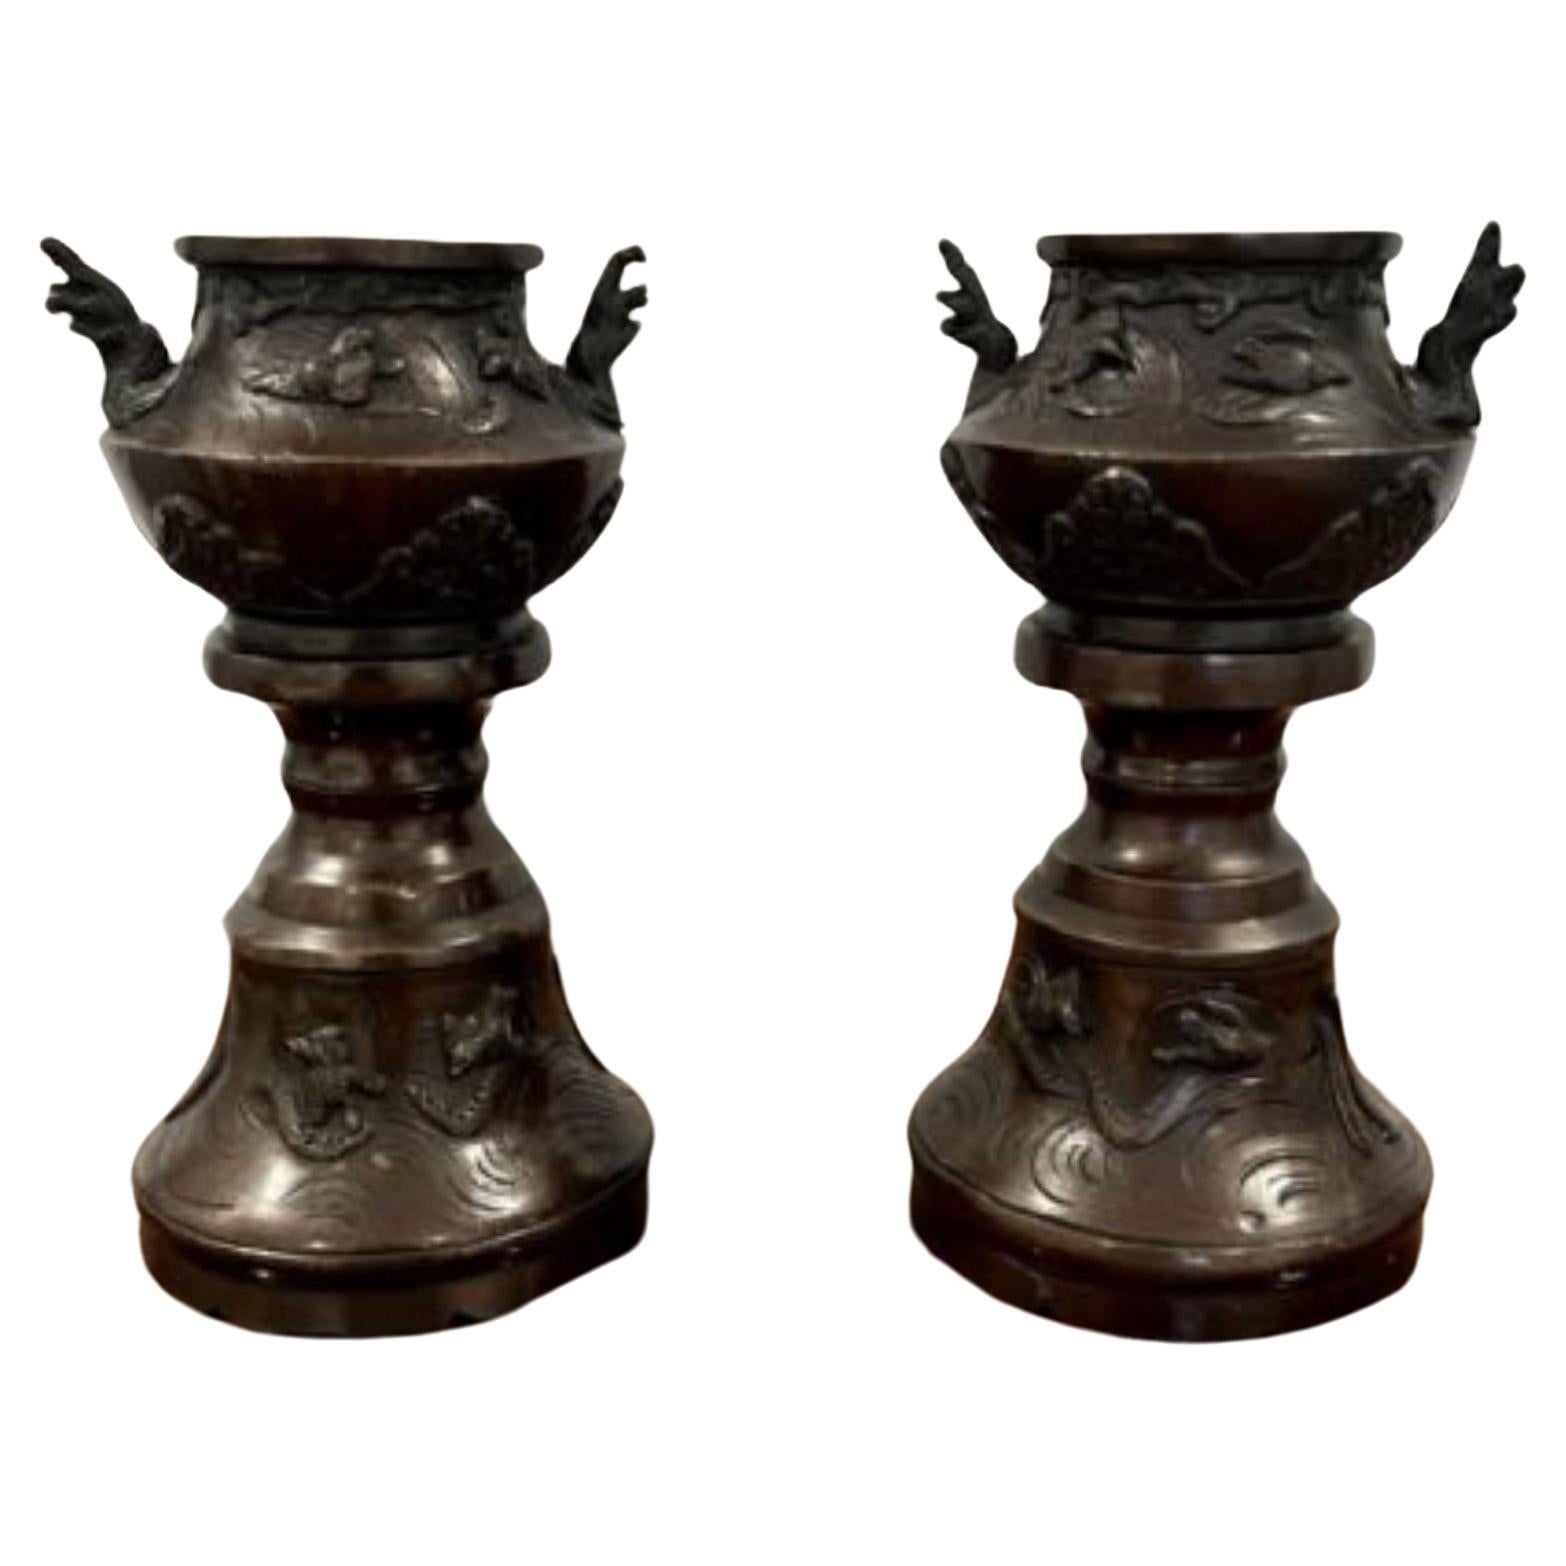 Quality pair of antique Victorian bronze Japanese vases  For Sale